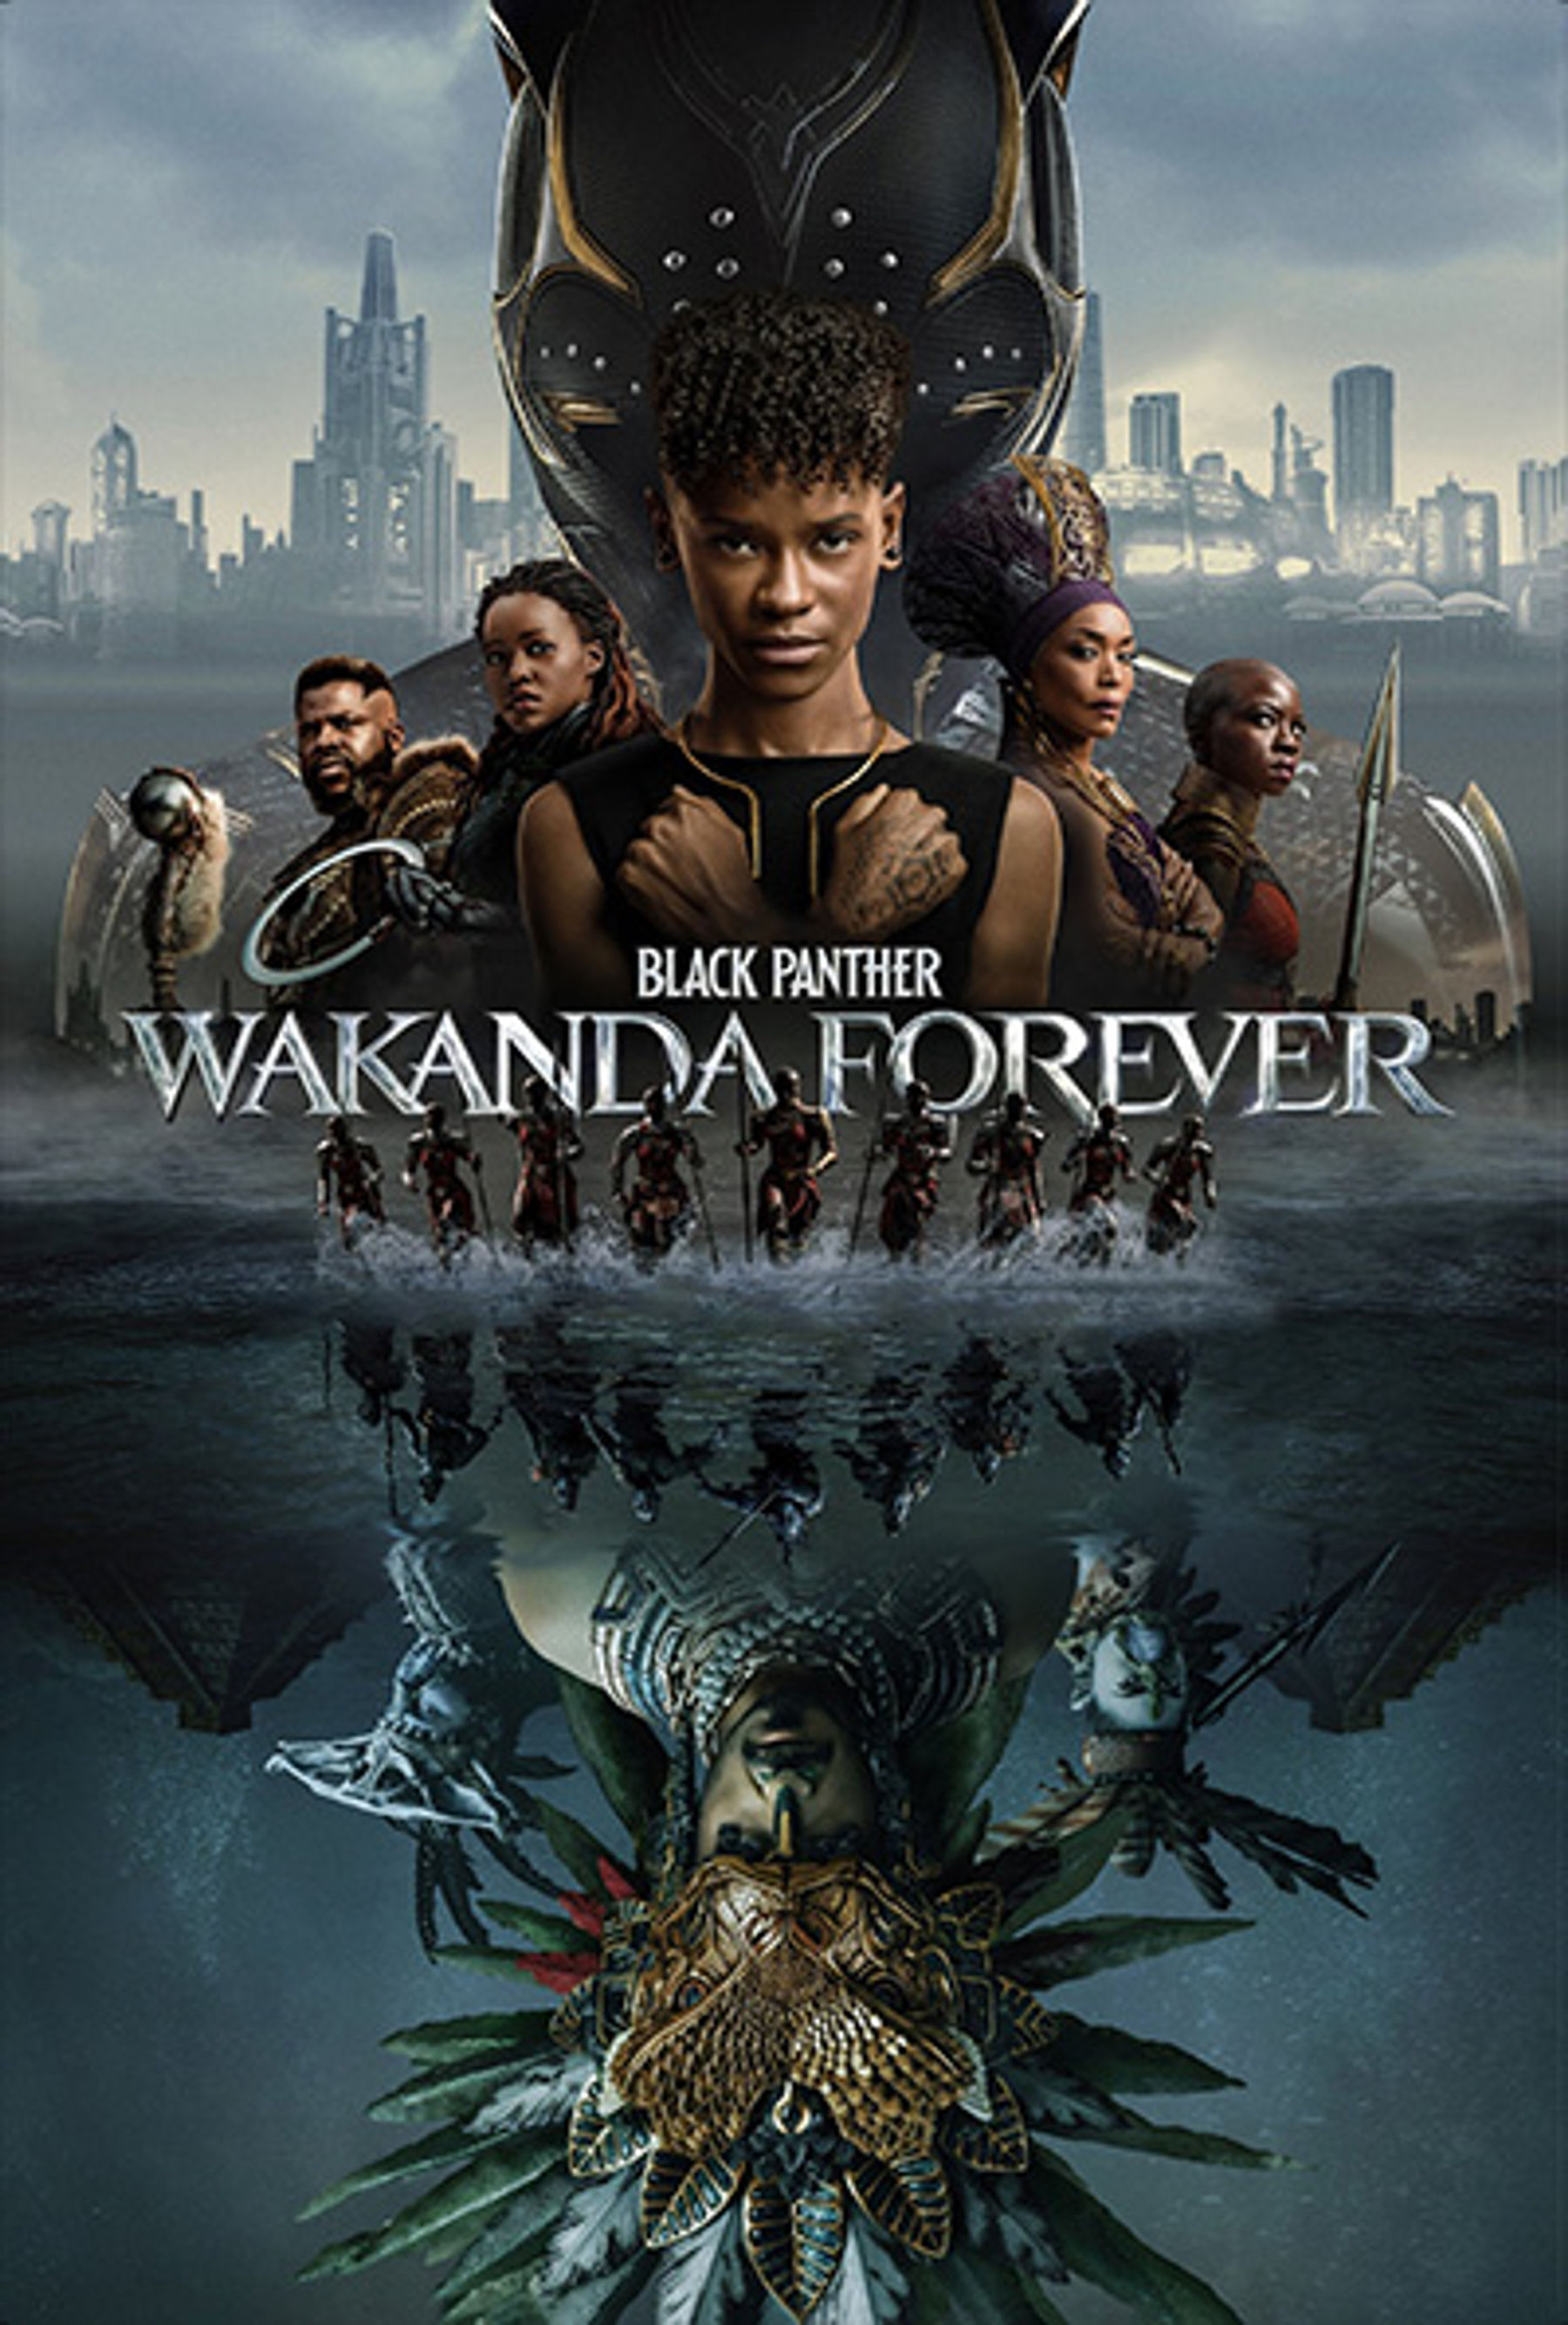 Theater On! Thursday | Black Panther: Wakanda Forever | Downtown San Francisco